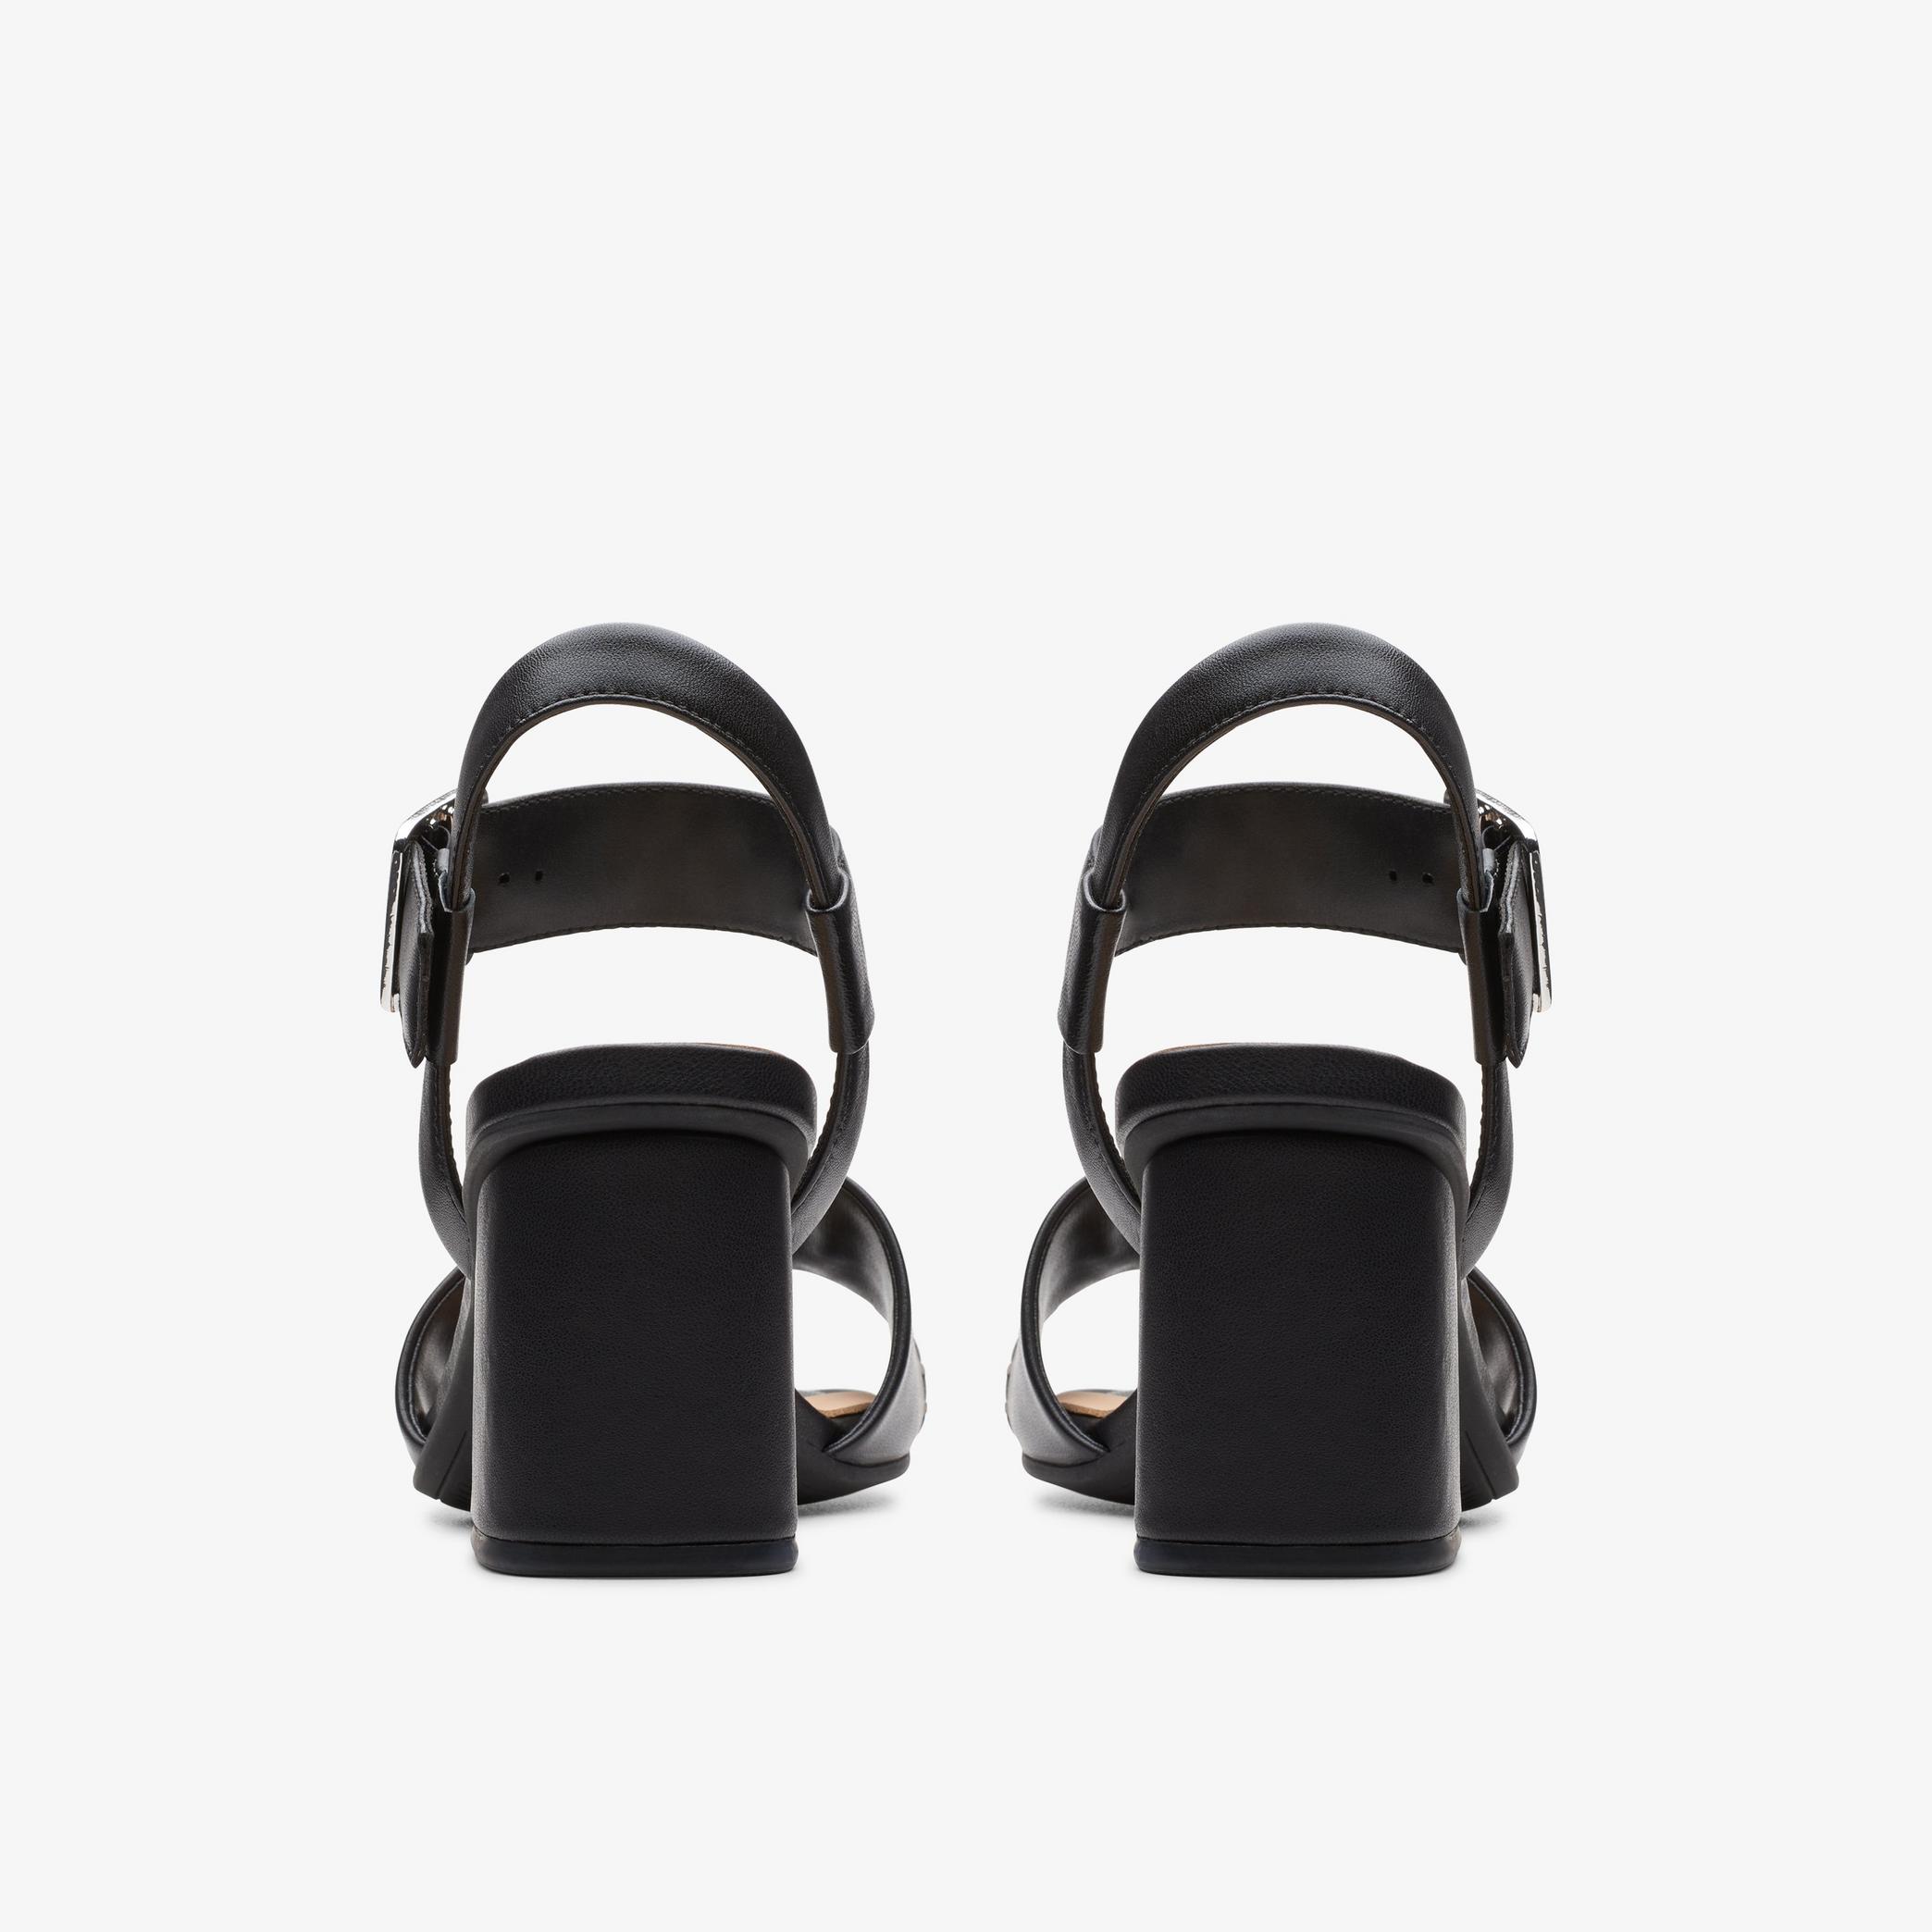 Siara65 Buckle Black Leather Heeled Sandals, view 5 of 6